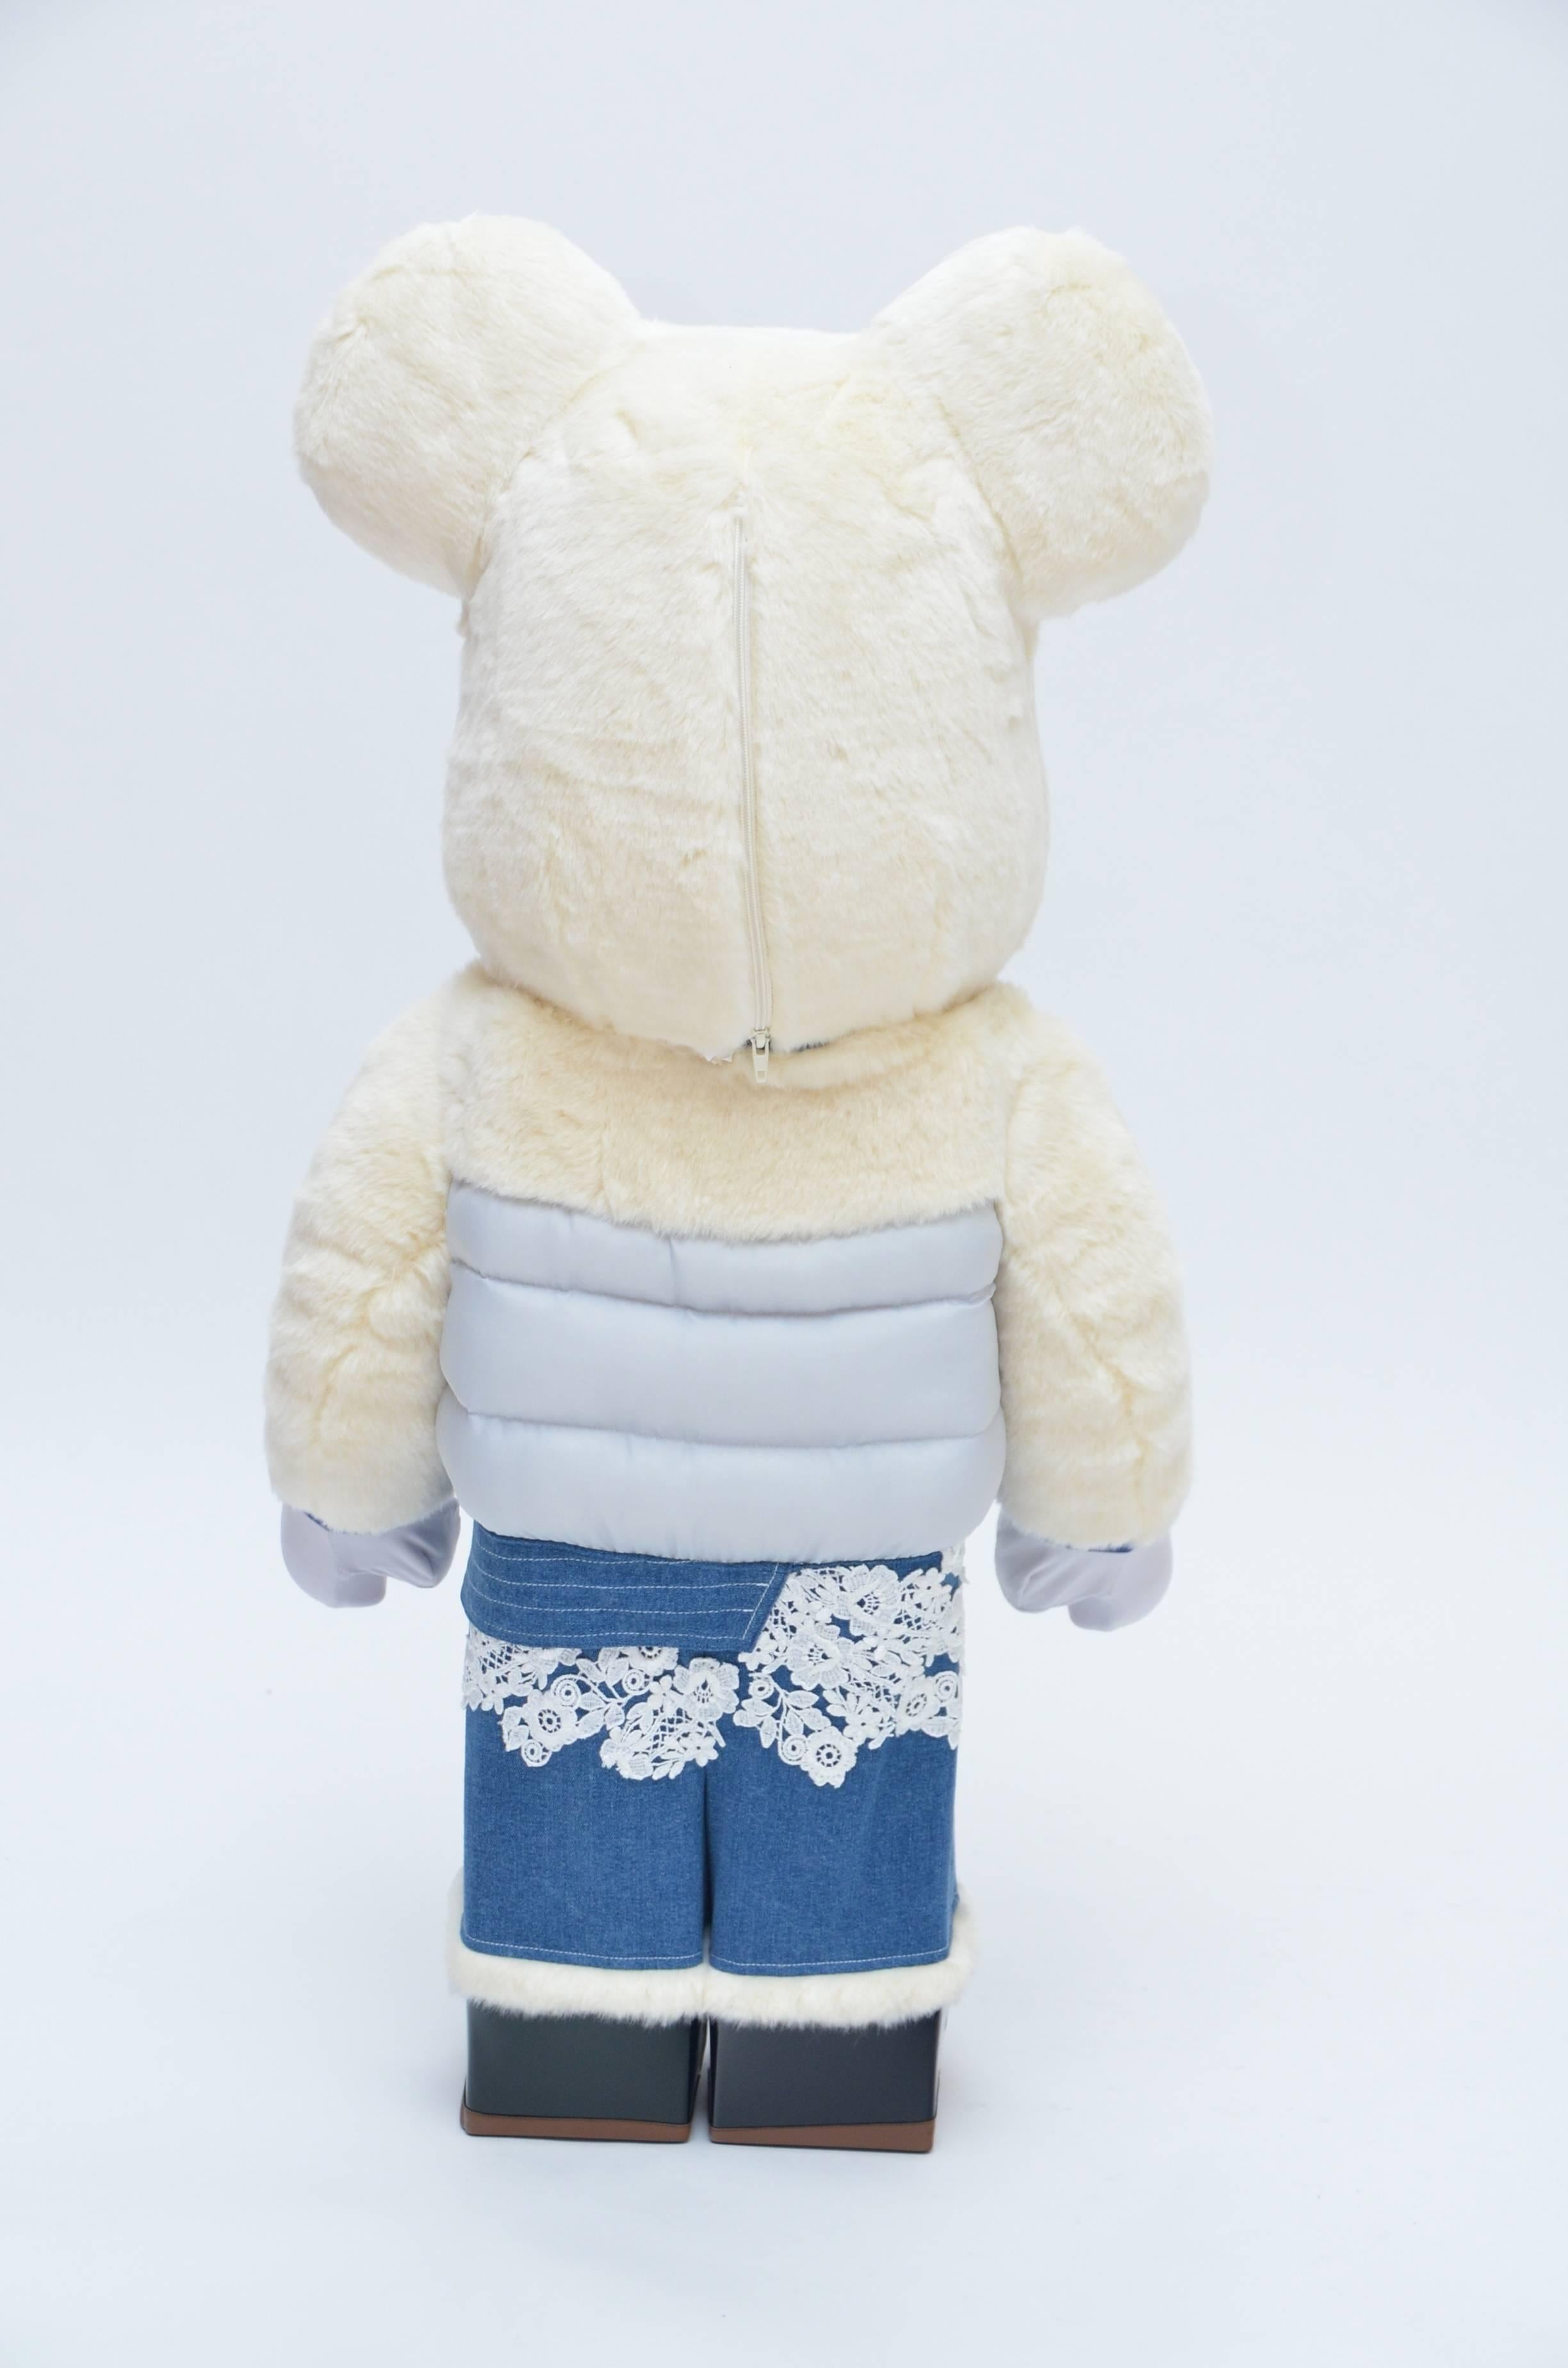 2017 SACAI MEDICOM BE@RBRICK from Colette Paris 1000% SIZE
Medicom Toy limited rare edition bearbrick for Sacai. 
This be@rbrick is wearing a women jacket and a denim skirt from Sacai 2017 AW  runaway collection. 
The jacket and skirt are removable